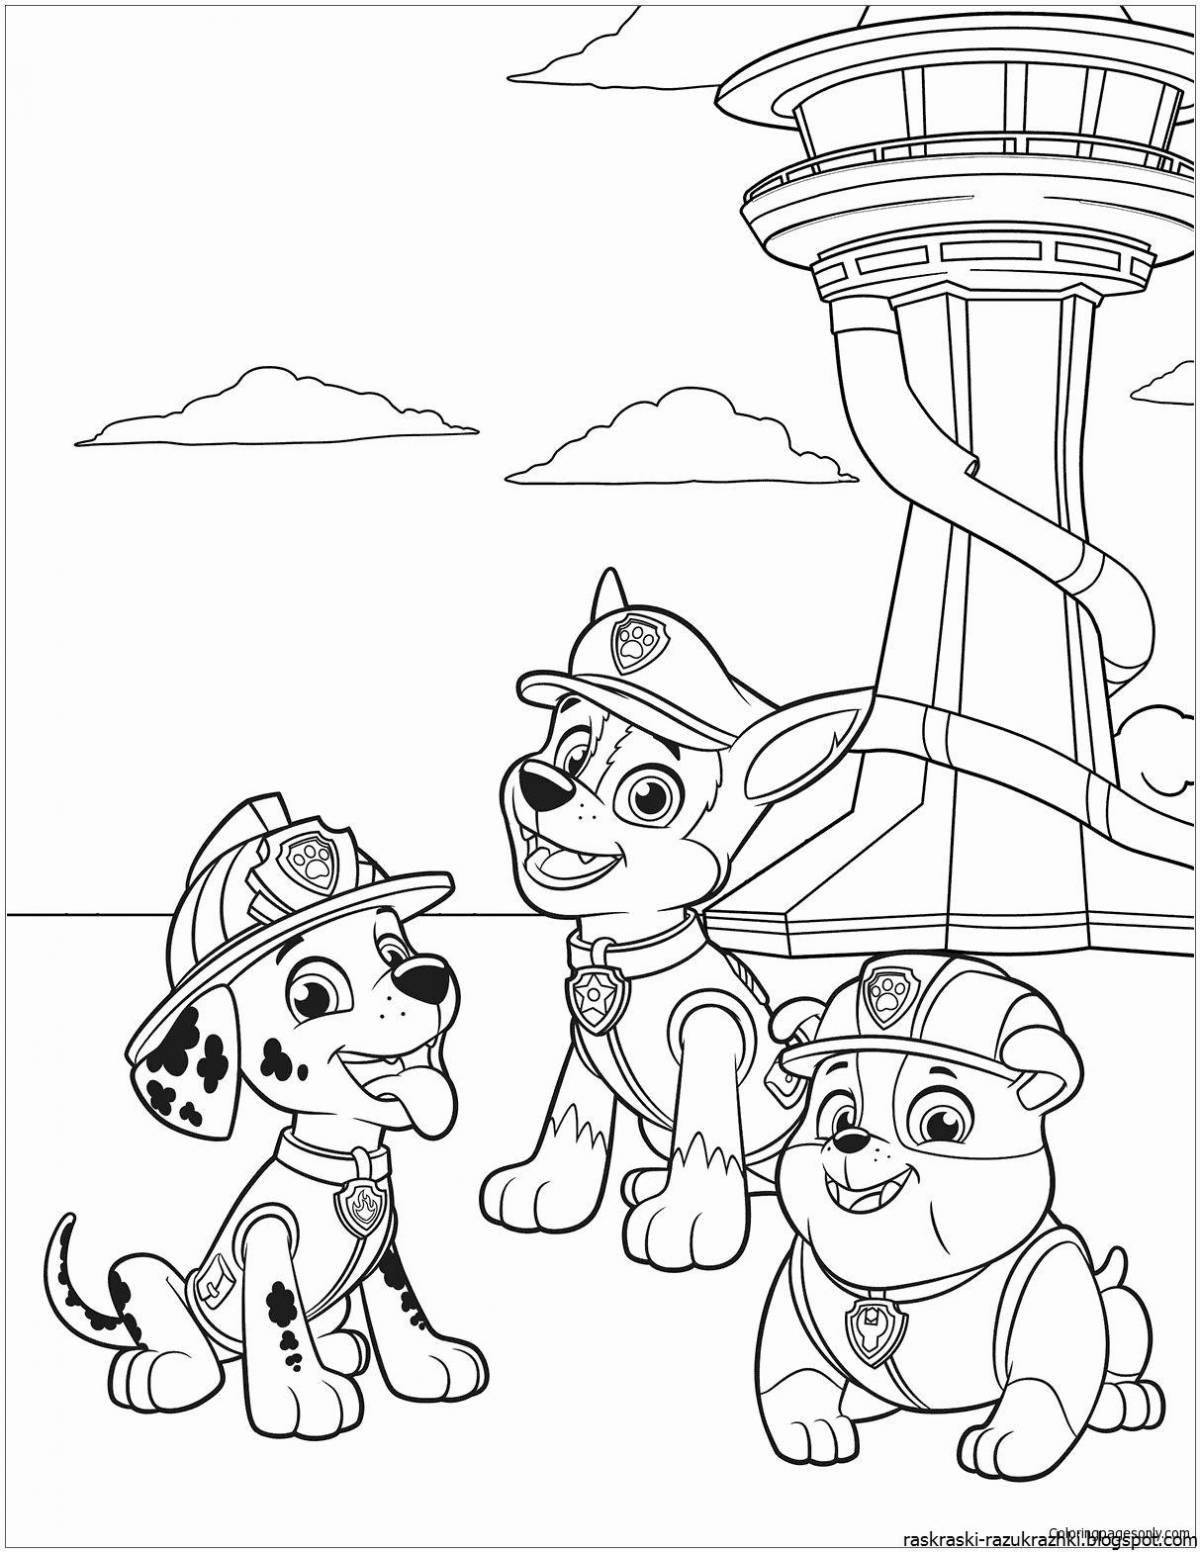 Friendly puppy coloring book